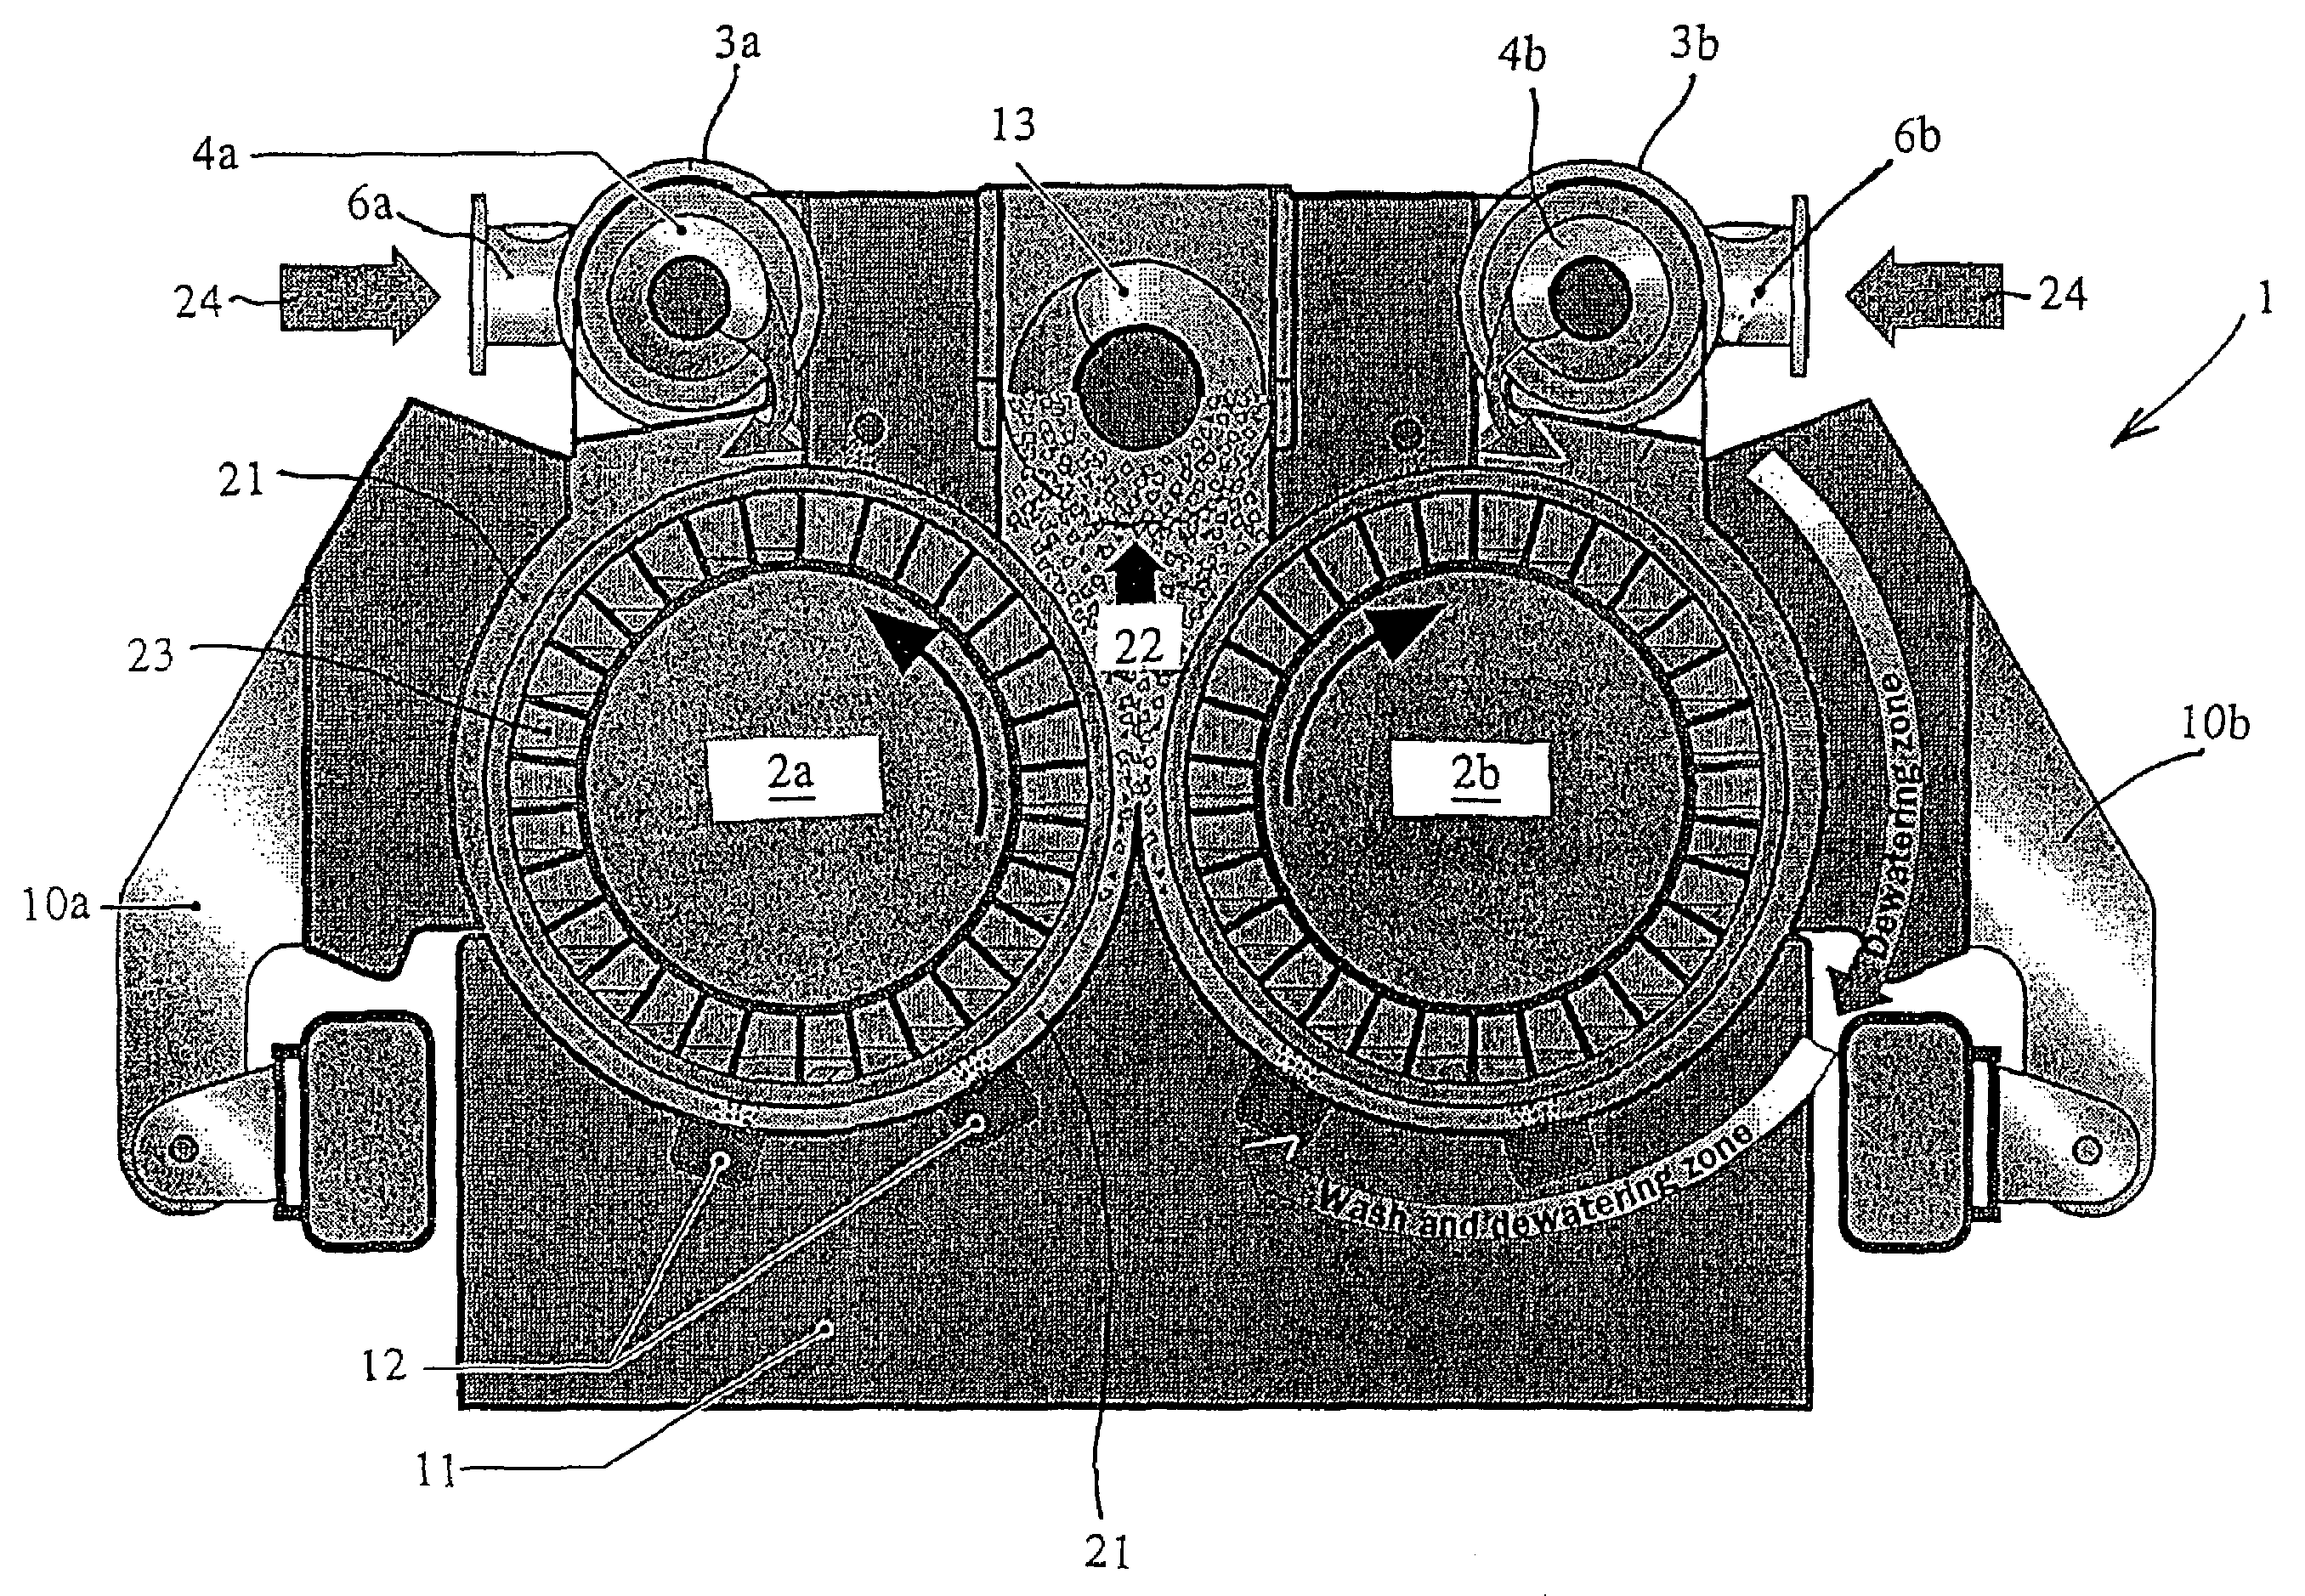 Method for distributing cellulose pulp of low and medium consistency in order to form a uniform pulp web